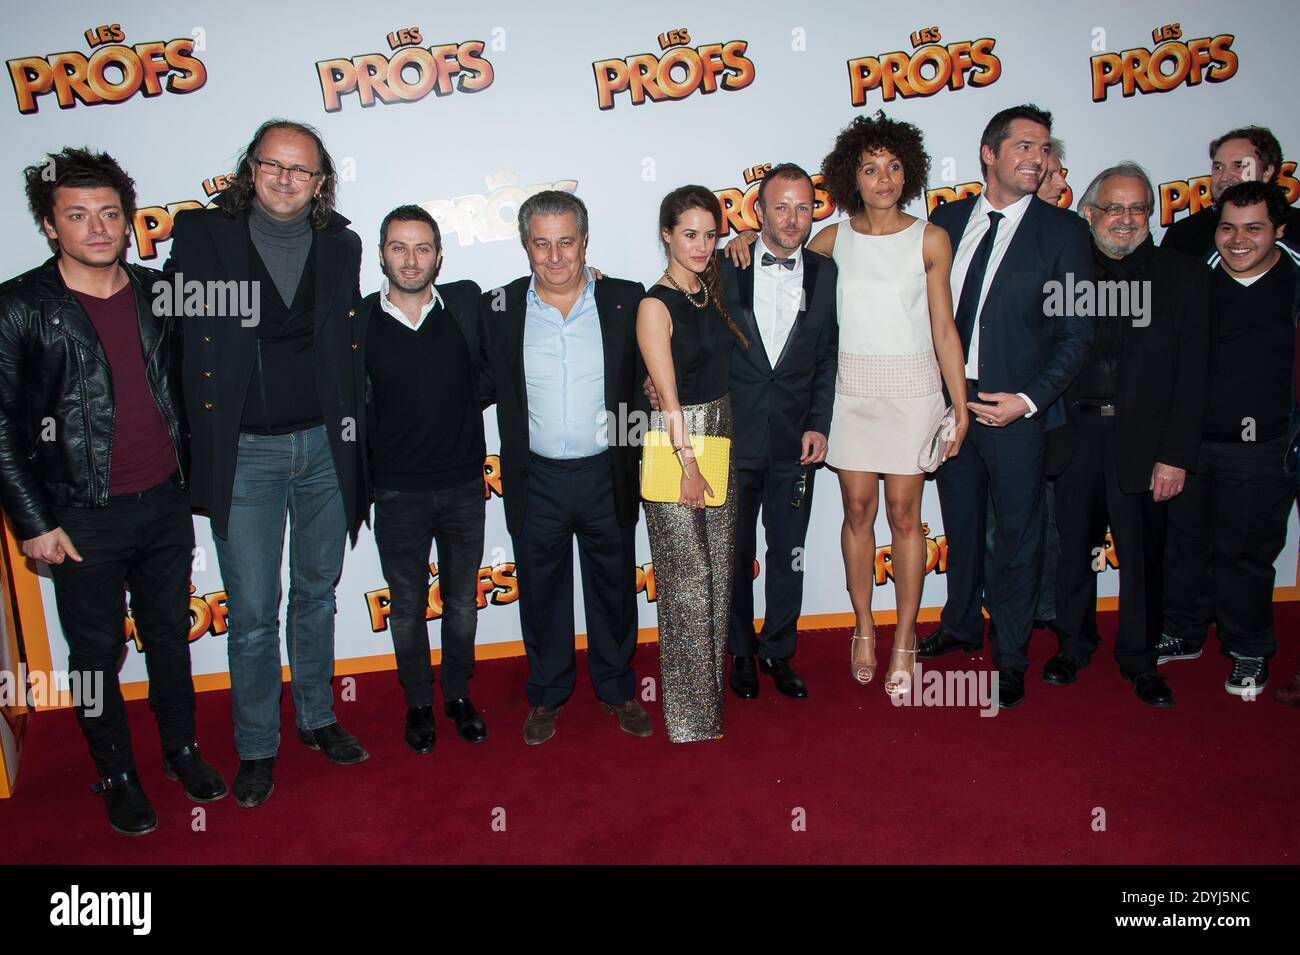 Cast of the movie including Director Pierre-Francois Martin-Laval, Christian Clavier, Isabelle Nanty, Kev Adams, Stefi Celma, Alice David, Arnaud Ducret, Francois Morel and Raymond Bouchard attending the premiere of 'Les Profs' held at the Grand Rex Cinema in Paris France, on April 09, 2013. Photo by Nicolas Genin/ABACAPRESS.COM Stock Photo